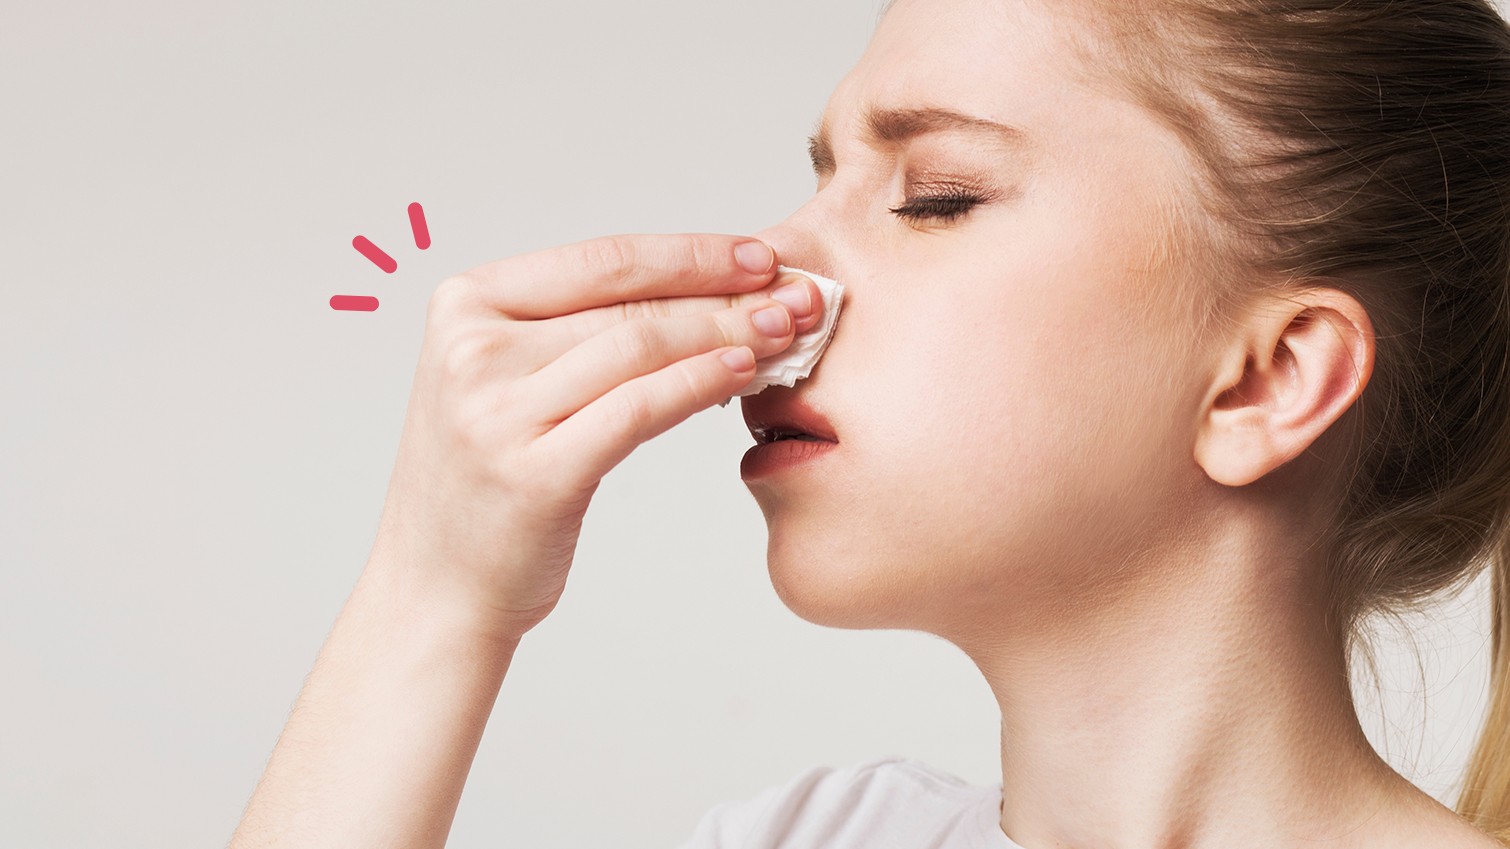 Sinusitis: Definition, causes, symptoms, and treatment